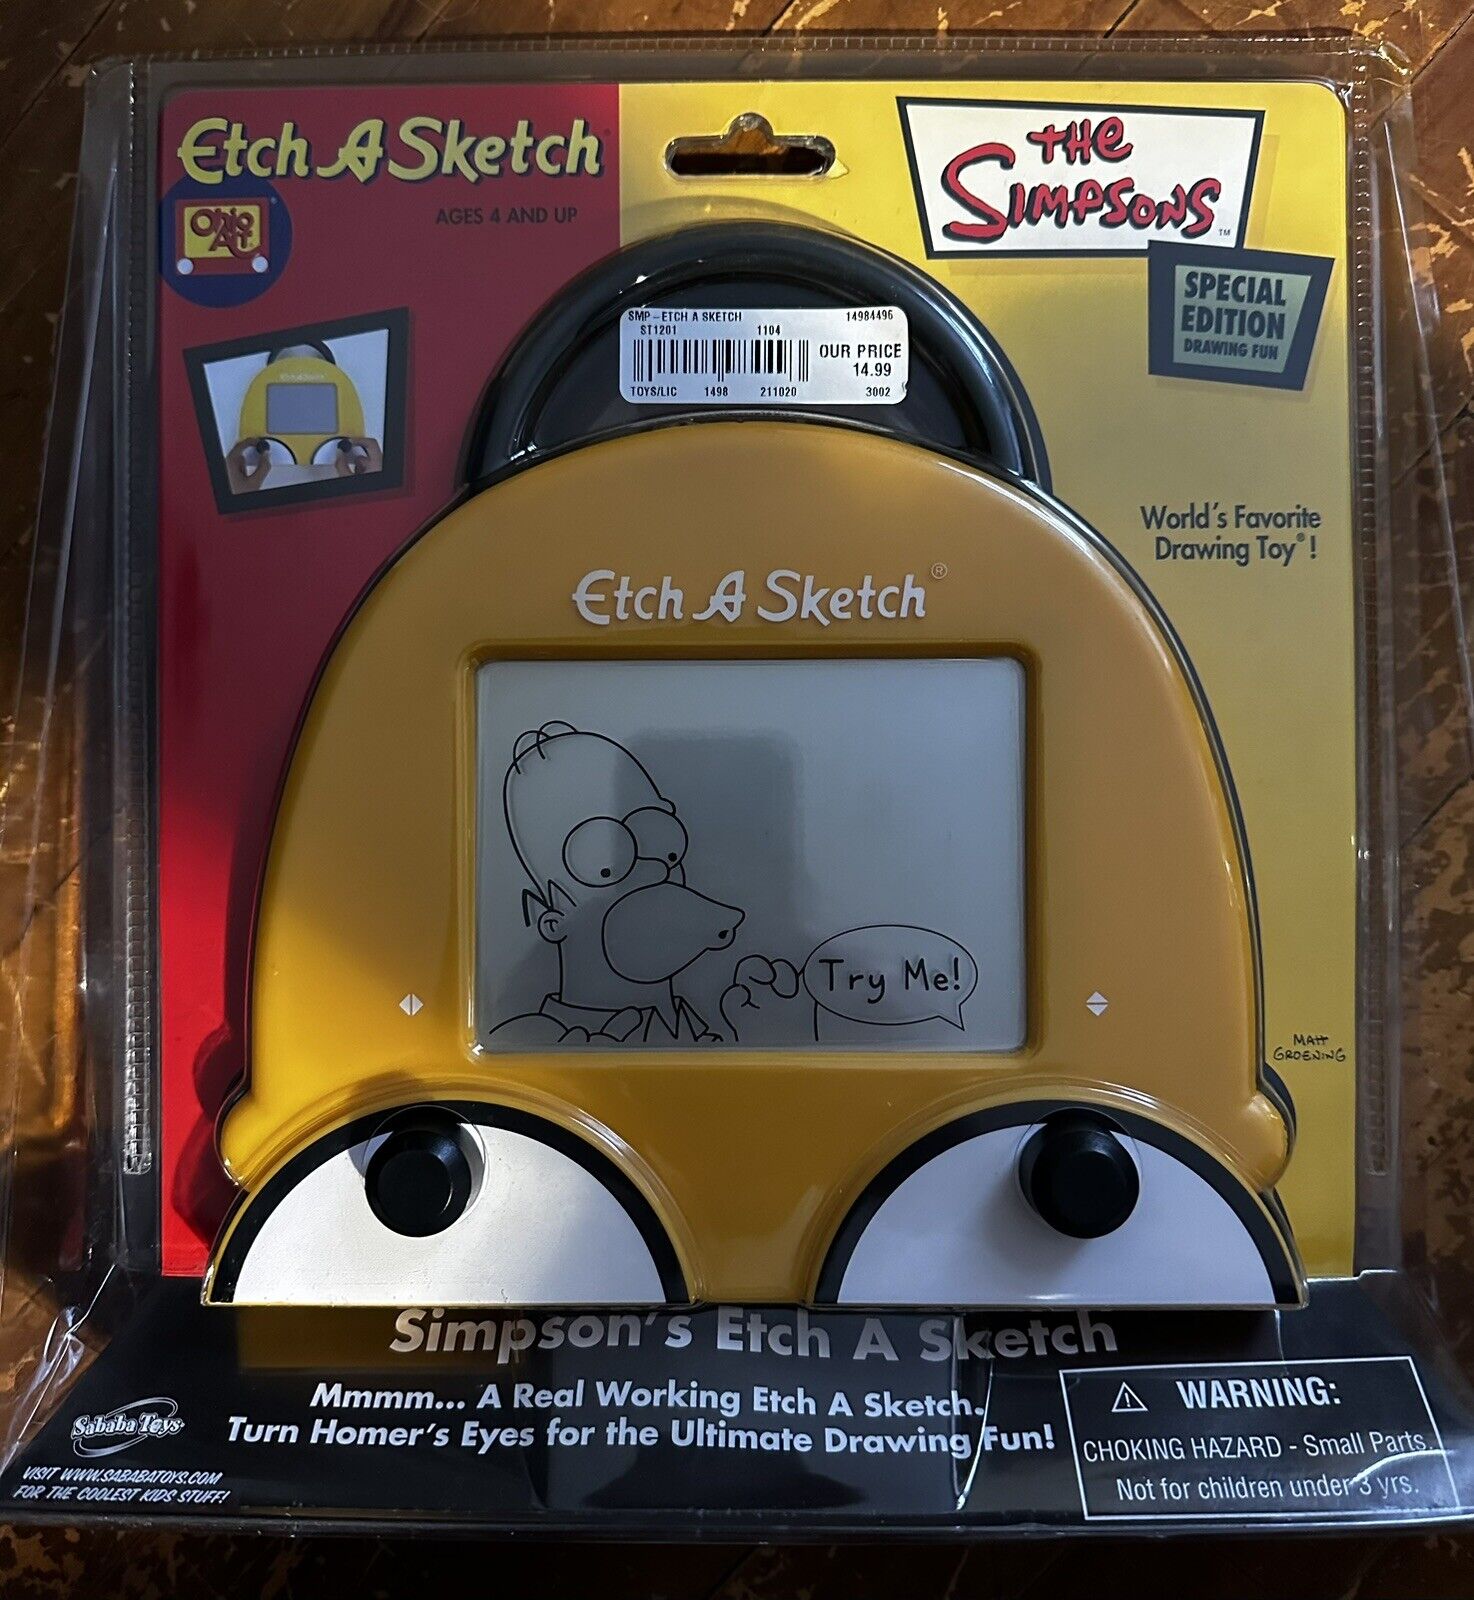 The Simpsons Etch A Sketch by Ohio Art Special Edition New Old Stock Rare! Ohio Art 302